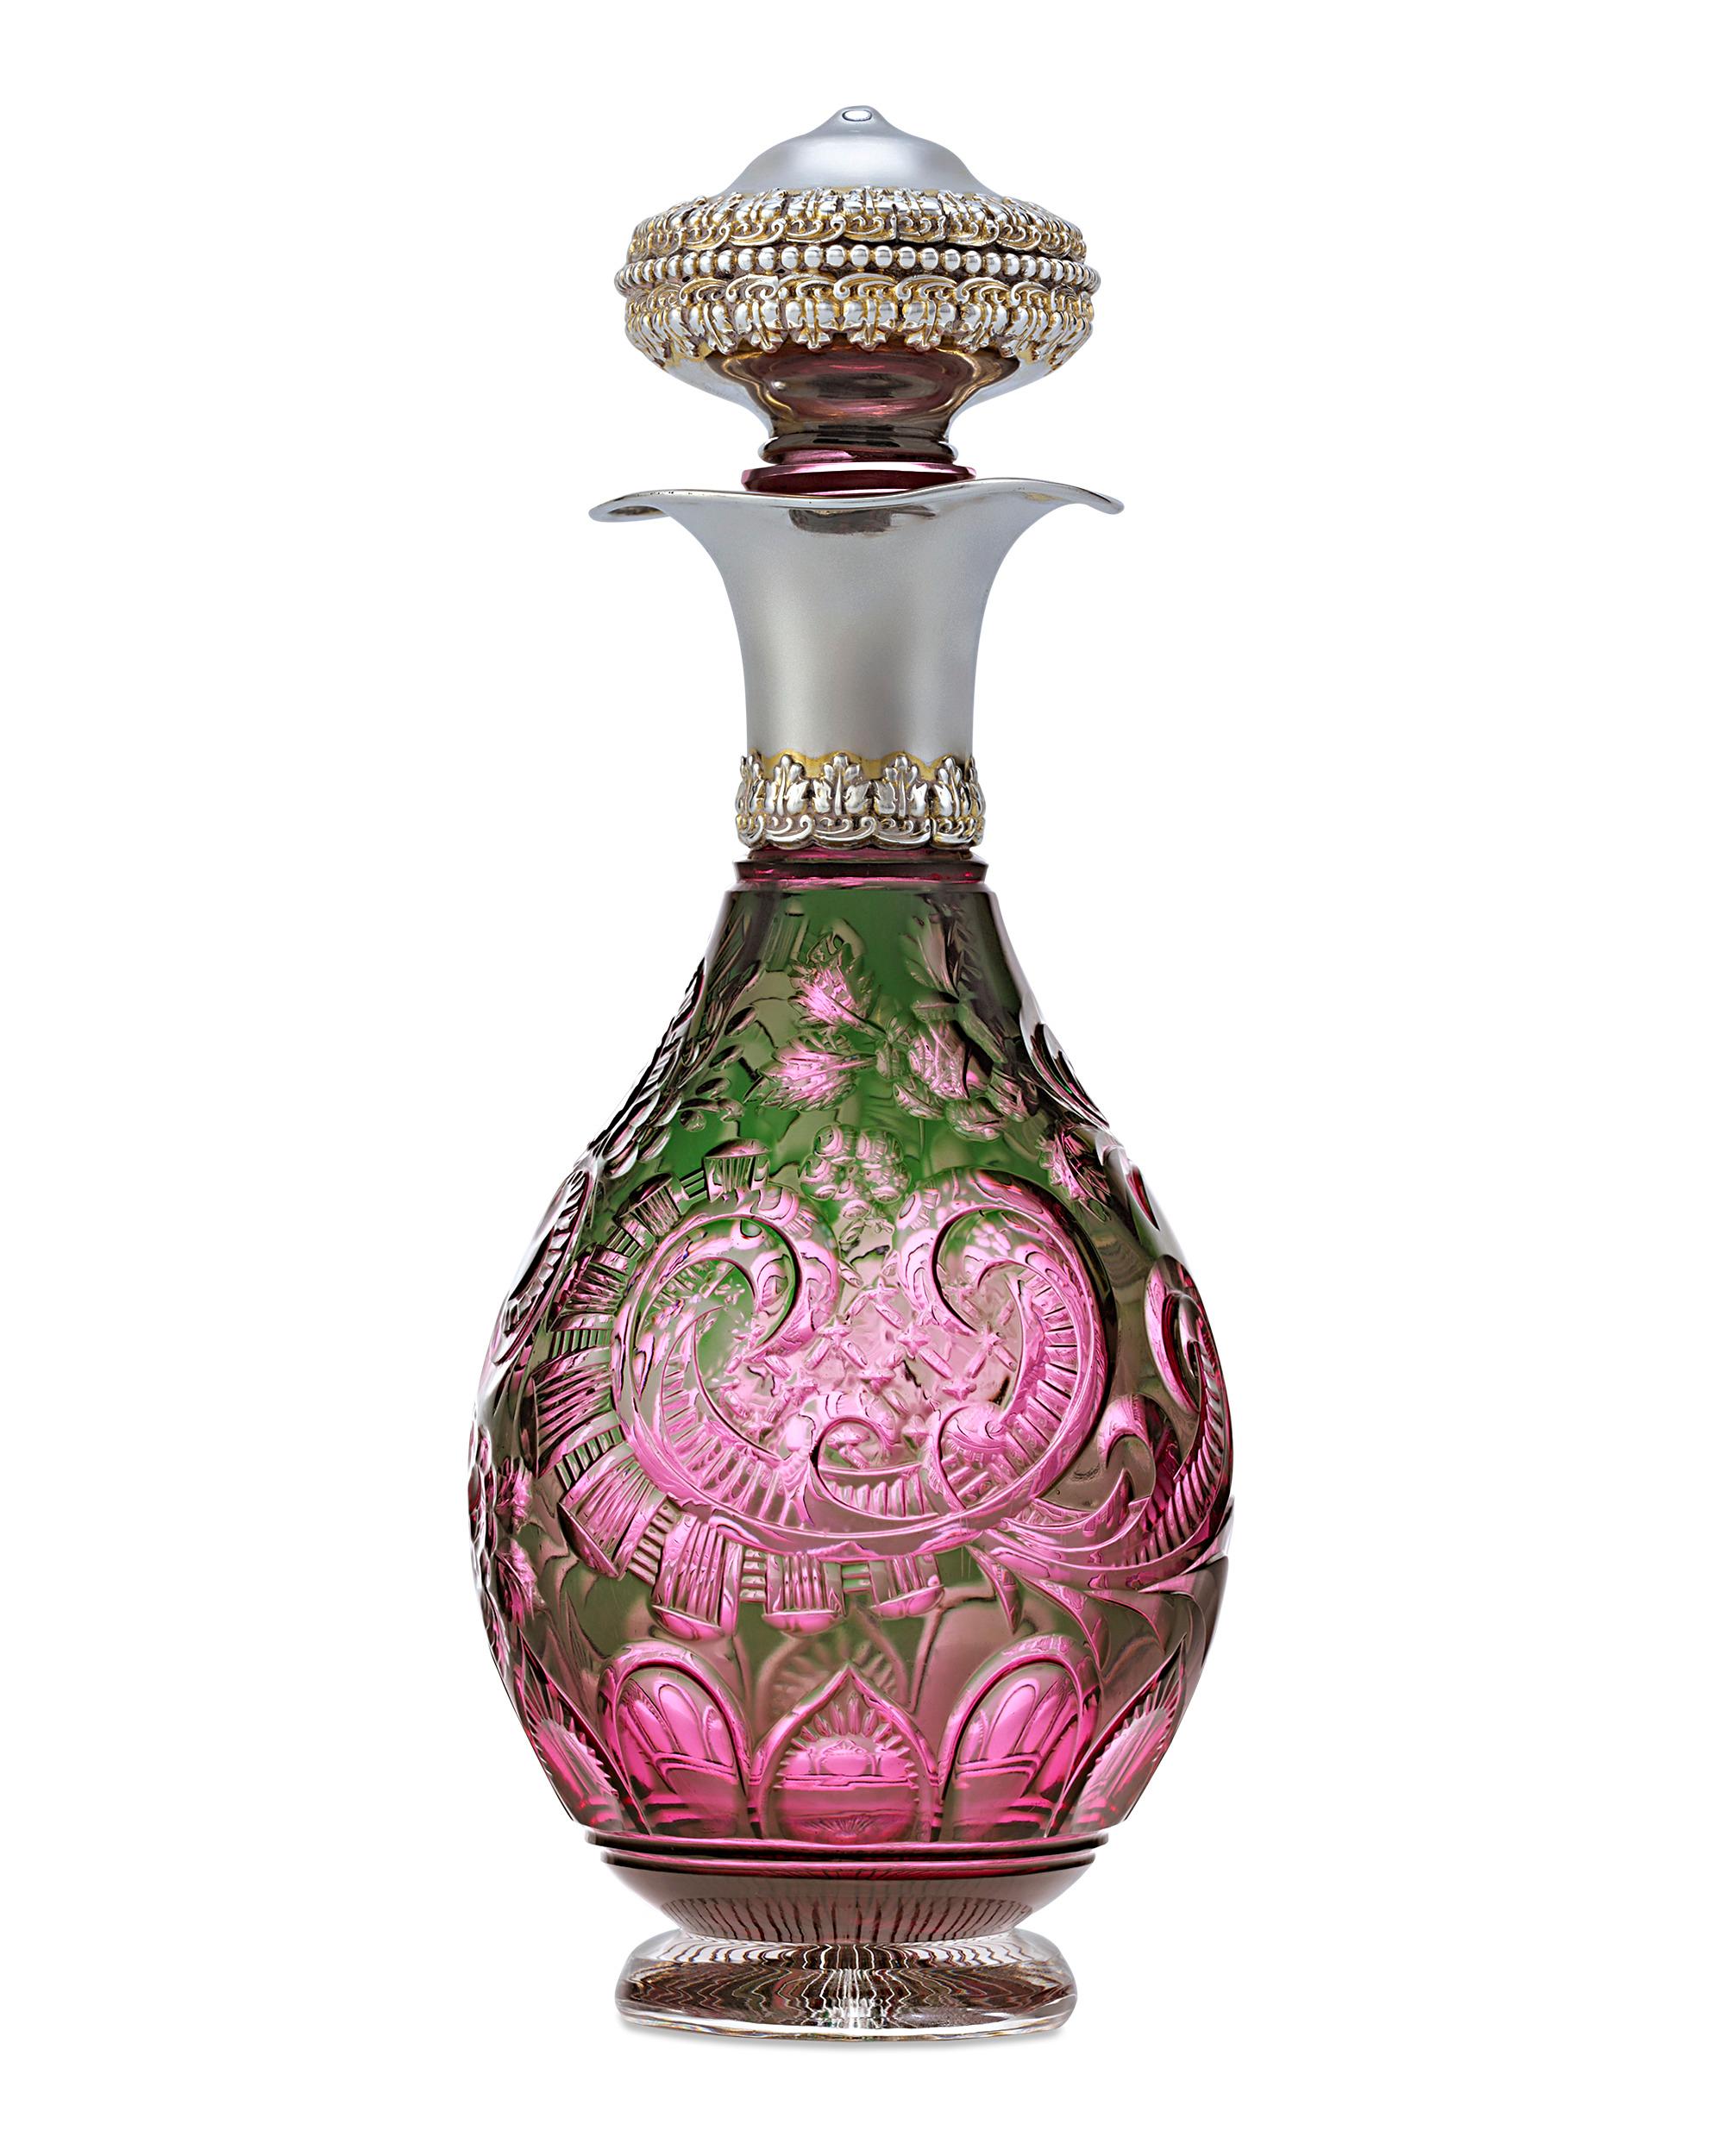 This charming intaglio cut glass perfume bottle boasts gorgeous color and an enchanting design. Masterfully crafted by celebrated English glassmakers Stevens & Williams, the scroll and foliate design is brilliantly cut from vibrant green to